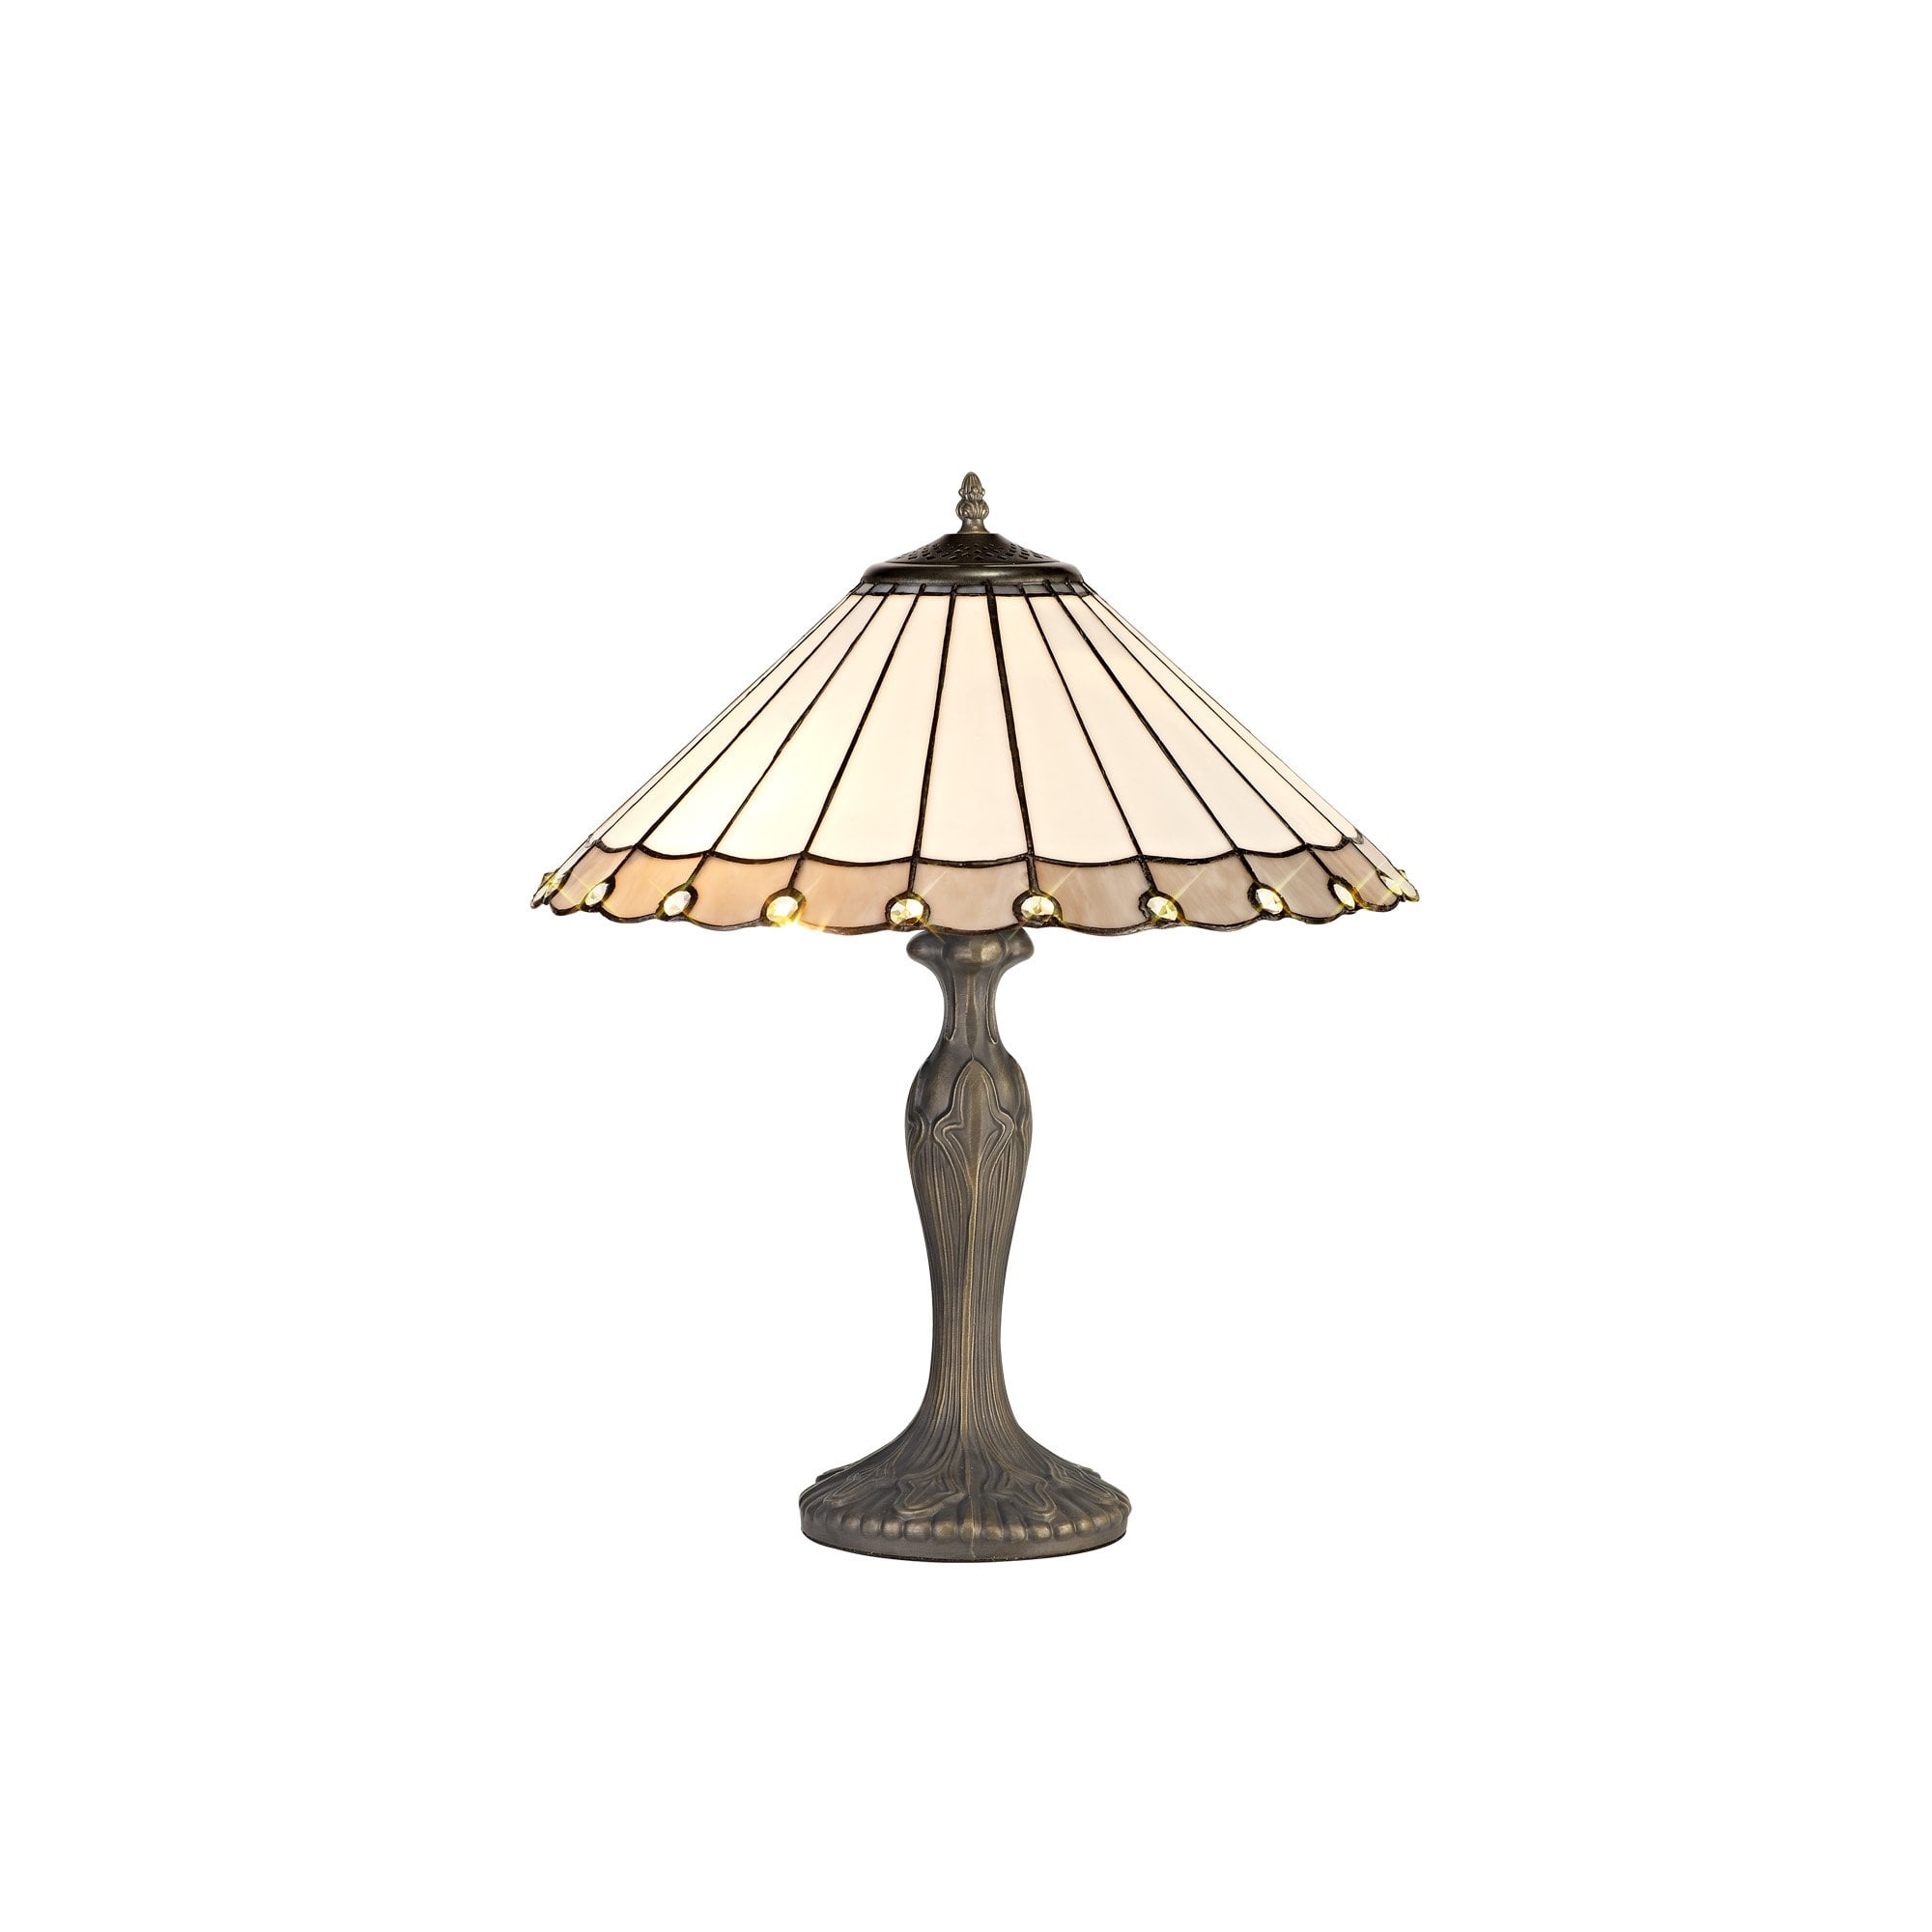 2 Light Curved Table Lamp E27 With 40cm Tiffany Shade, Grey/Cream/Crystal/Aged Antique Brass